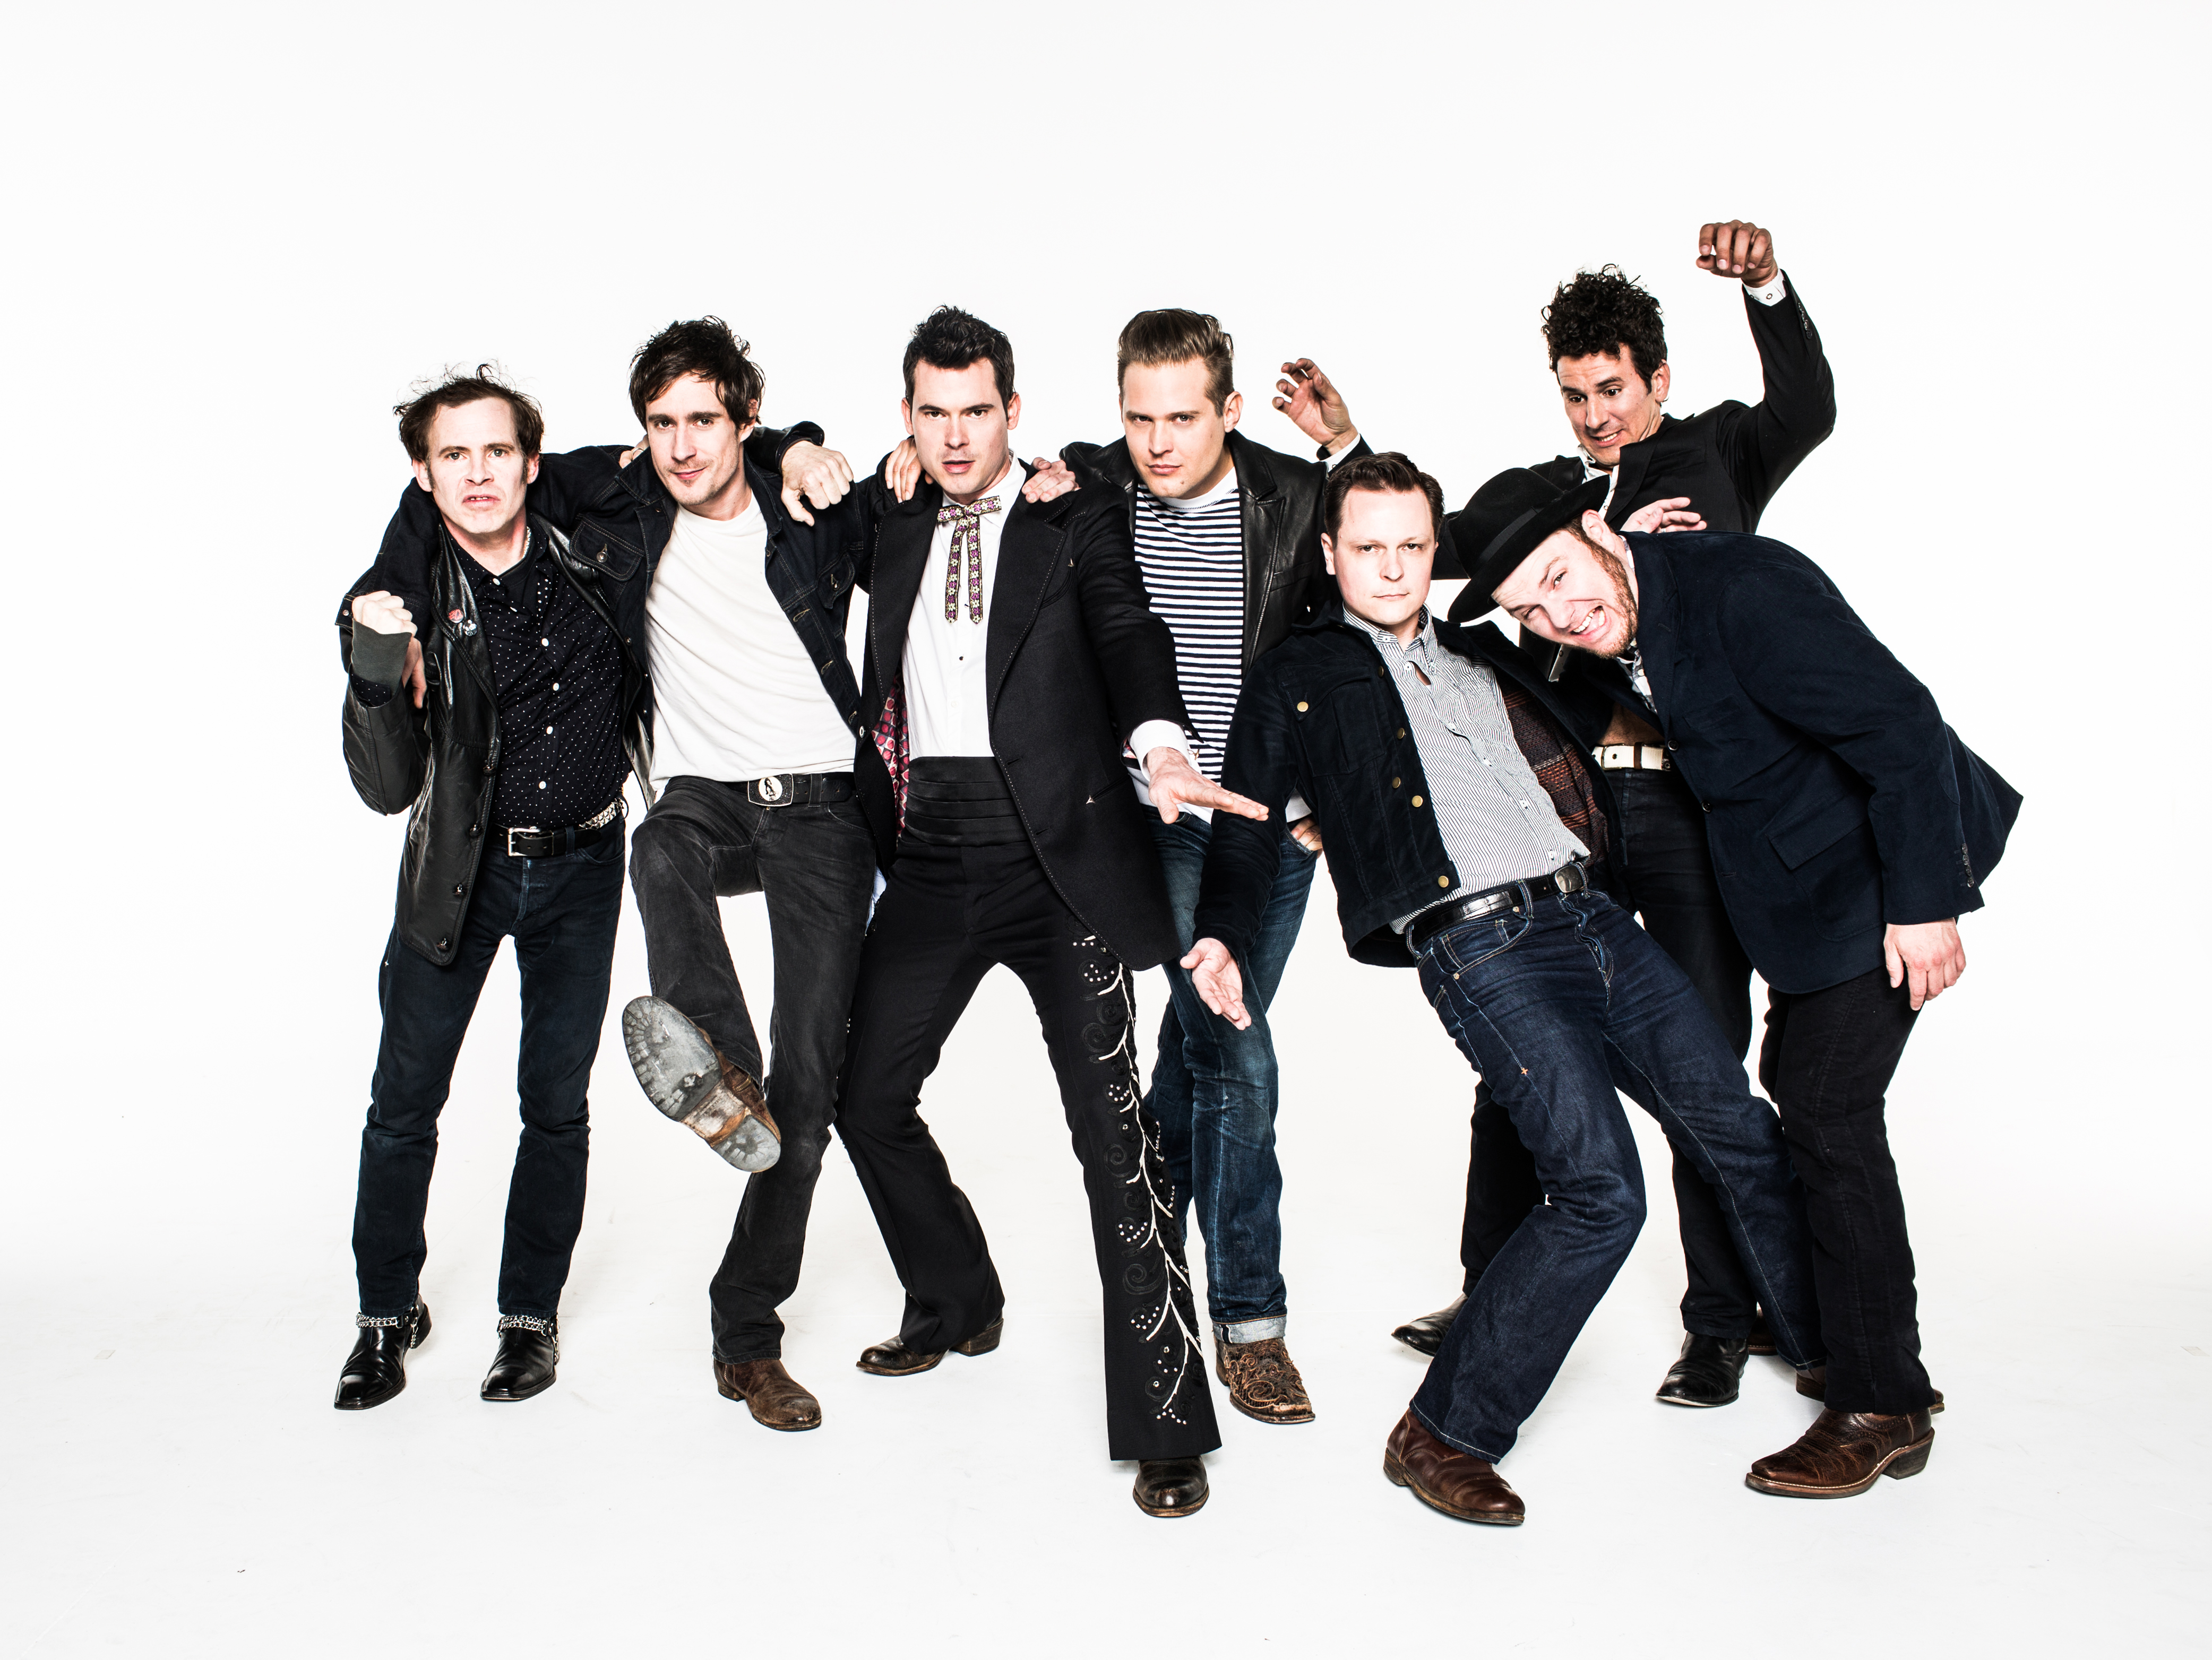 On “Doc’s Day” from Old Crow Medicine Show’s latest album, Remedy, the